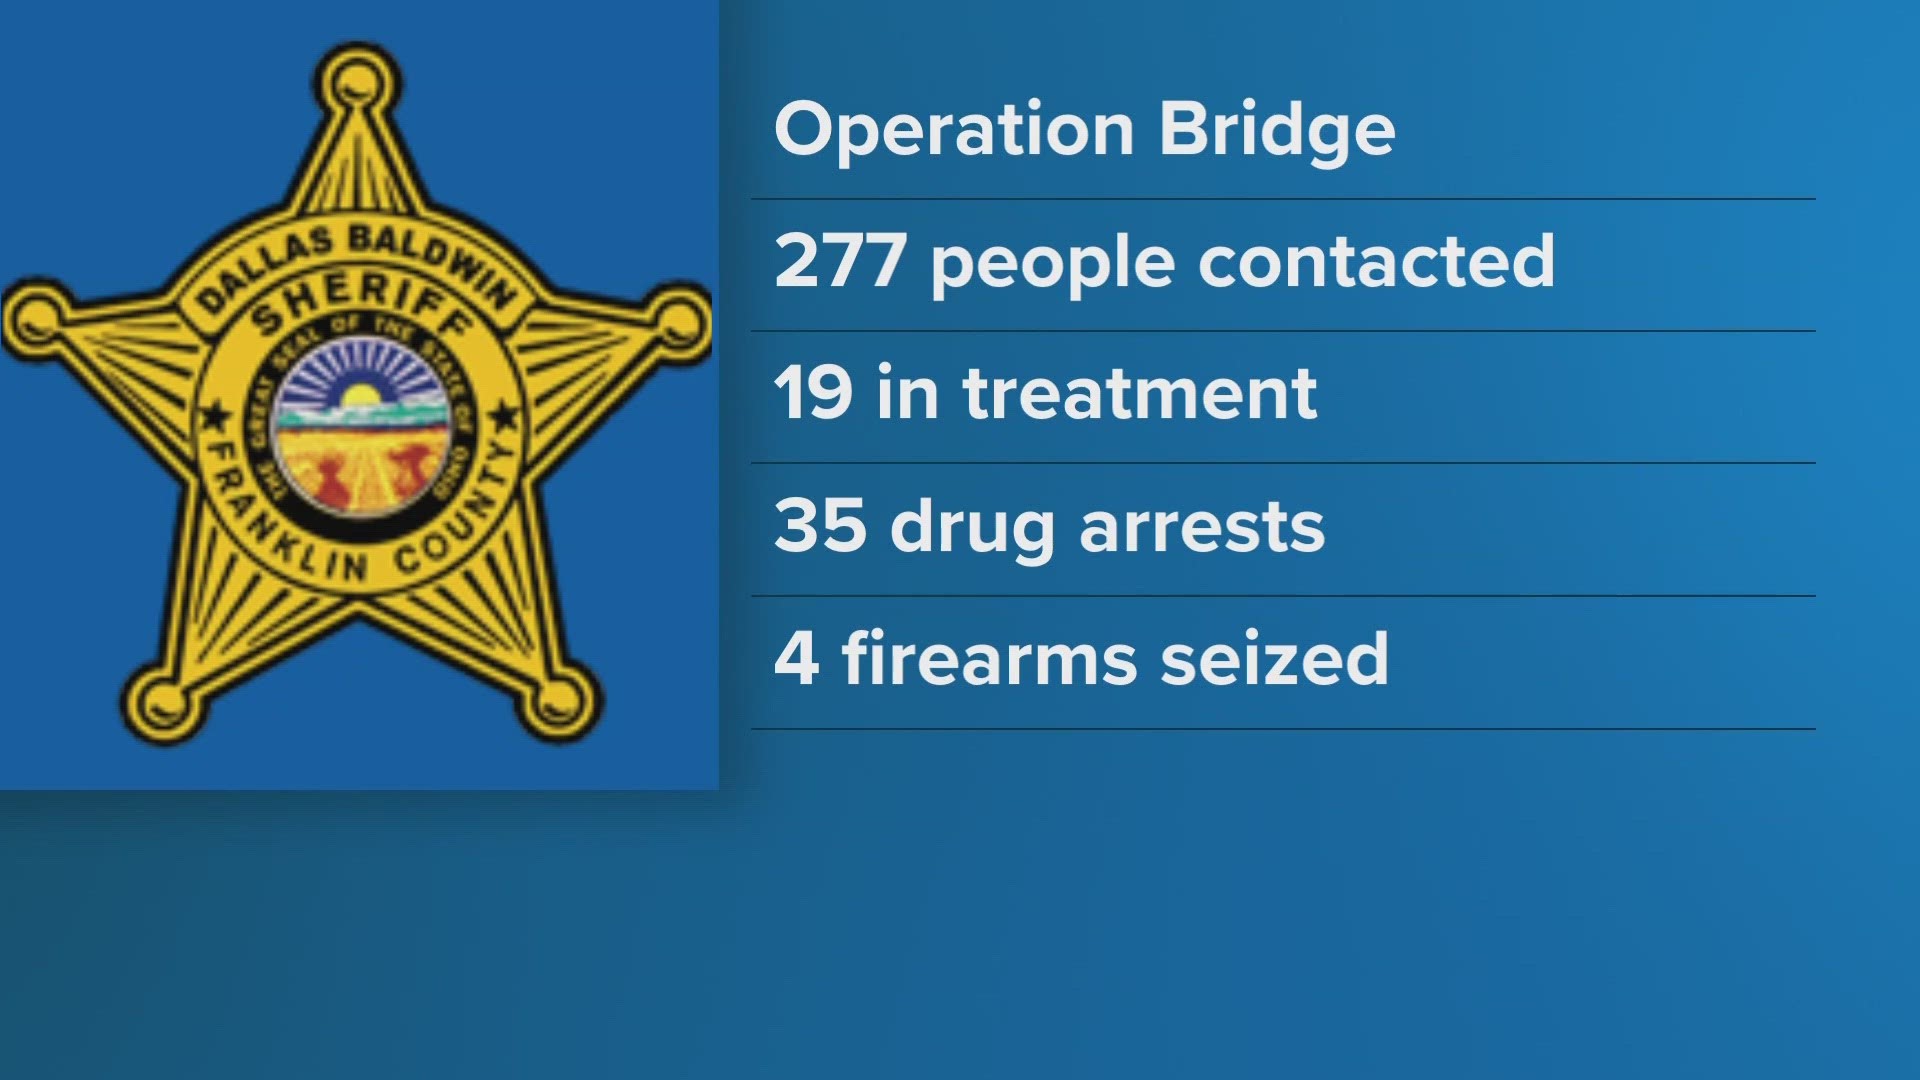 “Operation BRIDGE” was a four-day operation where officers executed warrants and arrested suspects in drug dealing and human trafficking incidents.